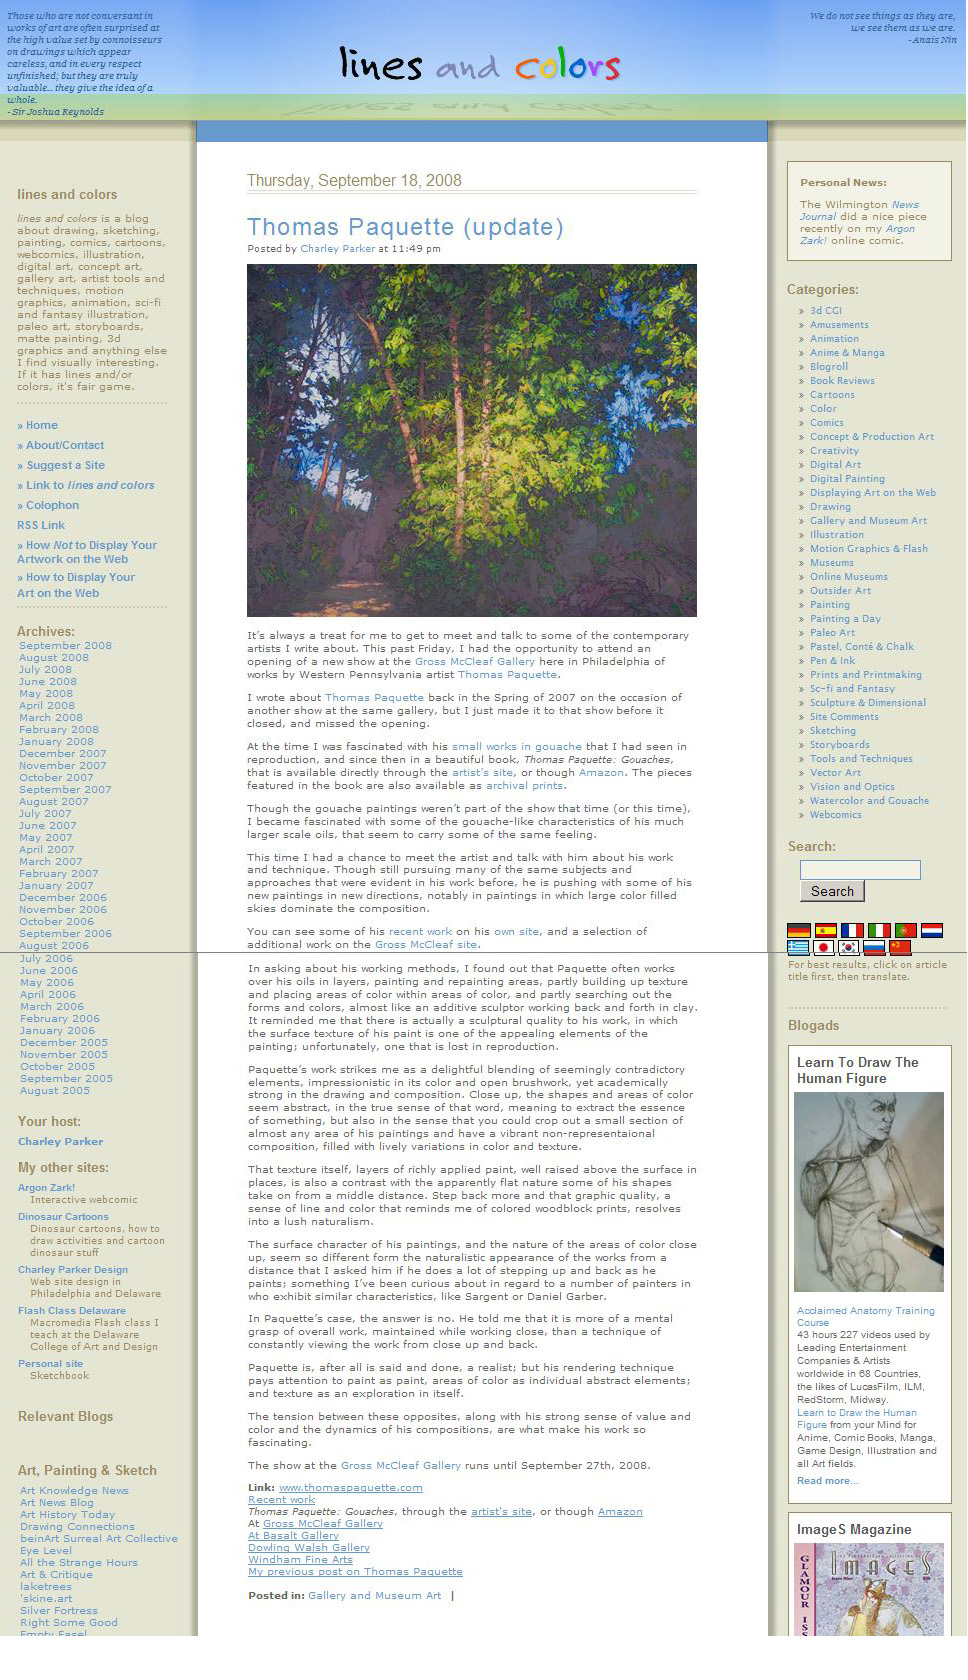 American Art Collector magazine article, Aug 2006